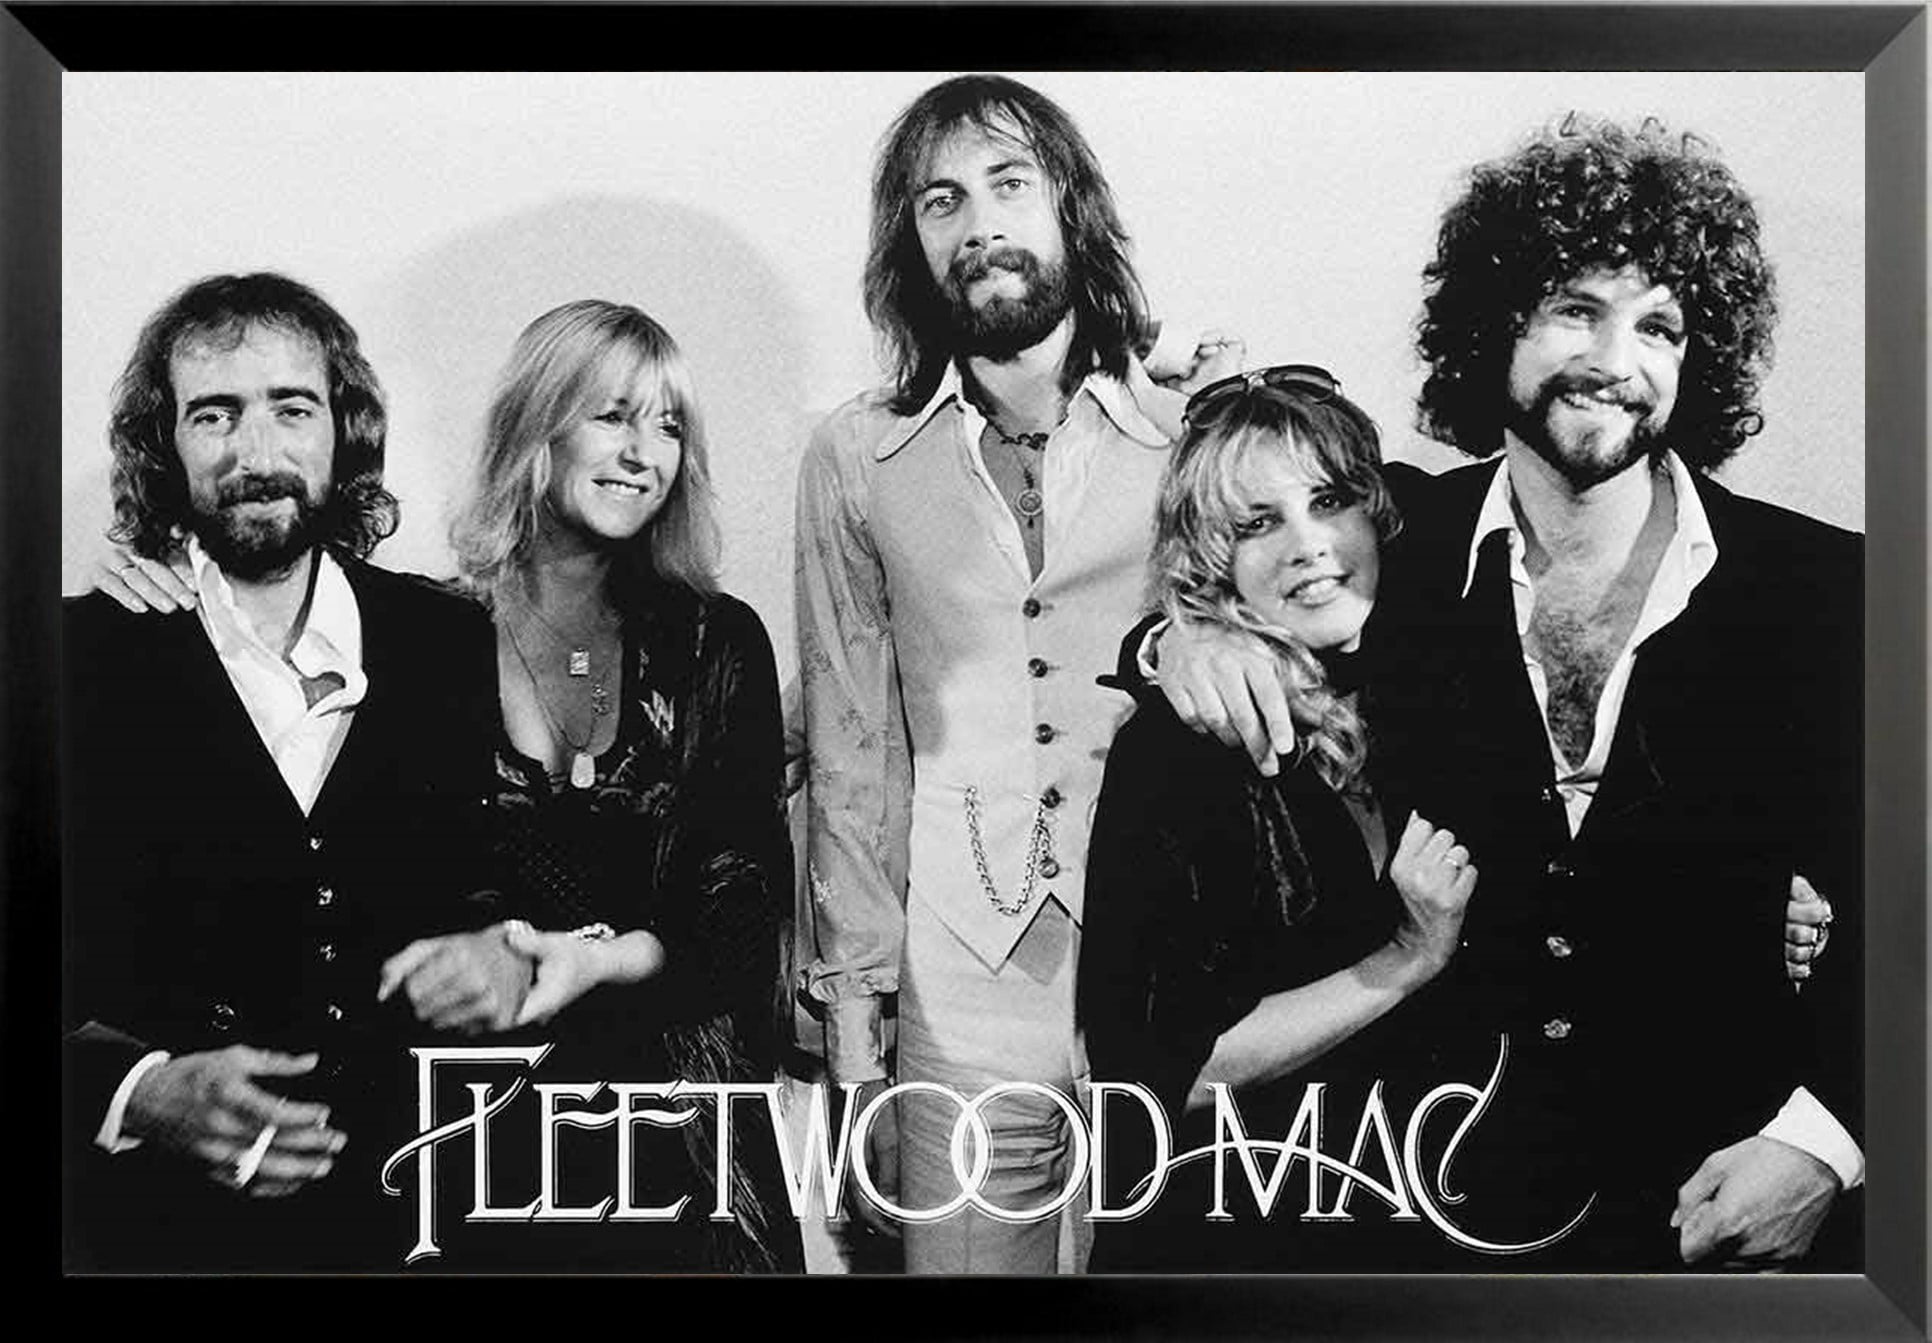 FLEETWOOD MAC GROUP BLACK & WHITE POSTER PRINT 36X24 NEW FAST FREE SHIPPING 